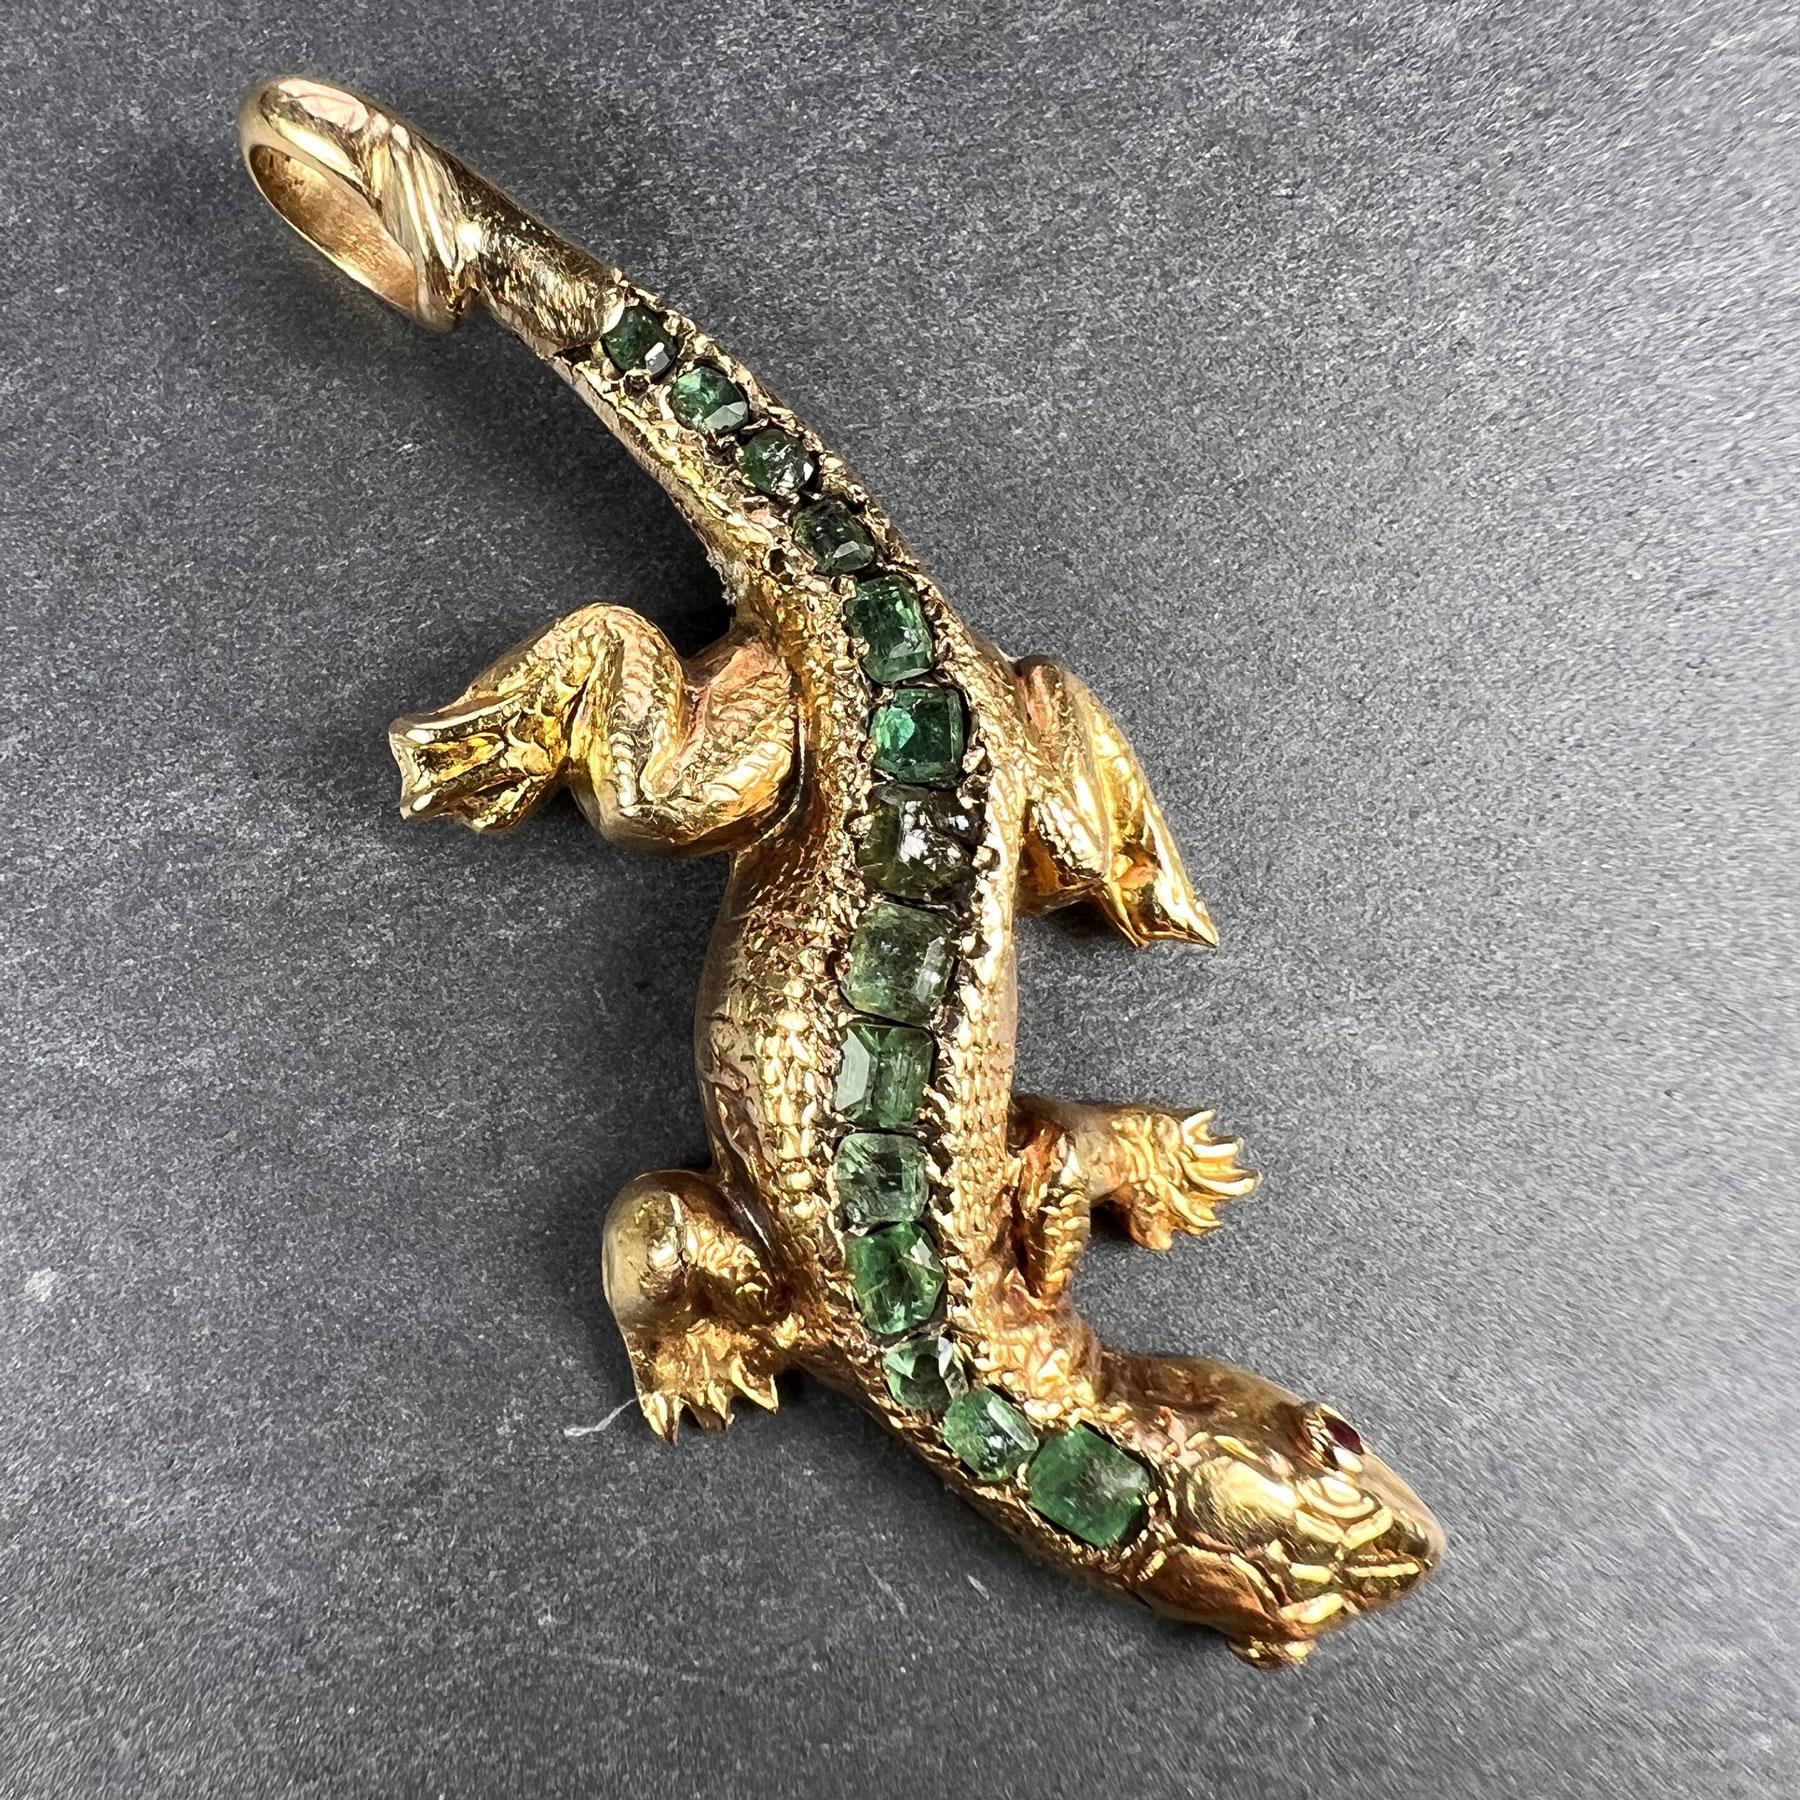 A realistically modelled antique salamander or lizard pendant in 18 karat (18K) yellow gold with chased scale detail, set with 14 emerald cut emeralds to the spine, with cabochon ruby eyes. The emeralds are somewhat abraded, but estimated to weigh a